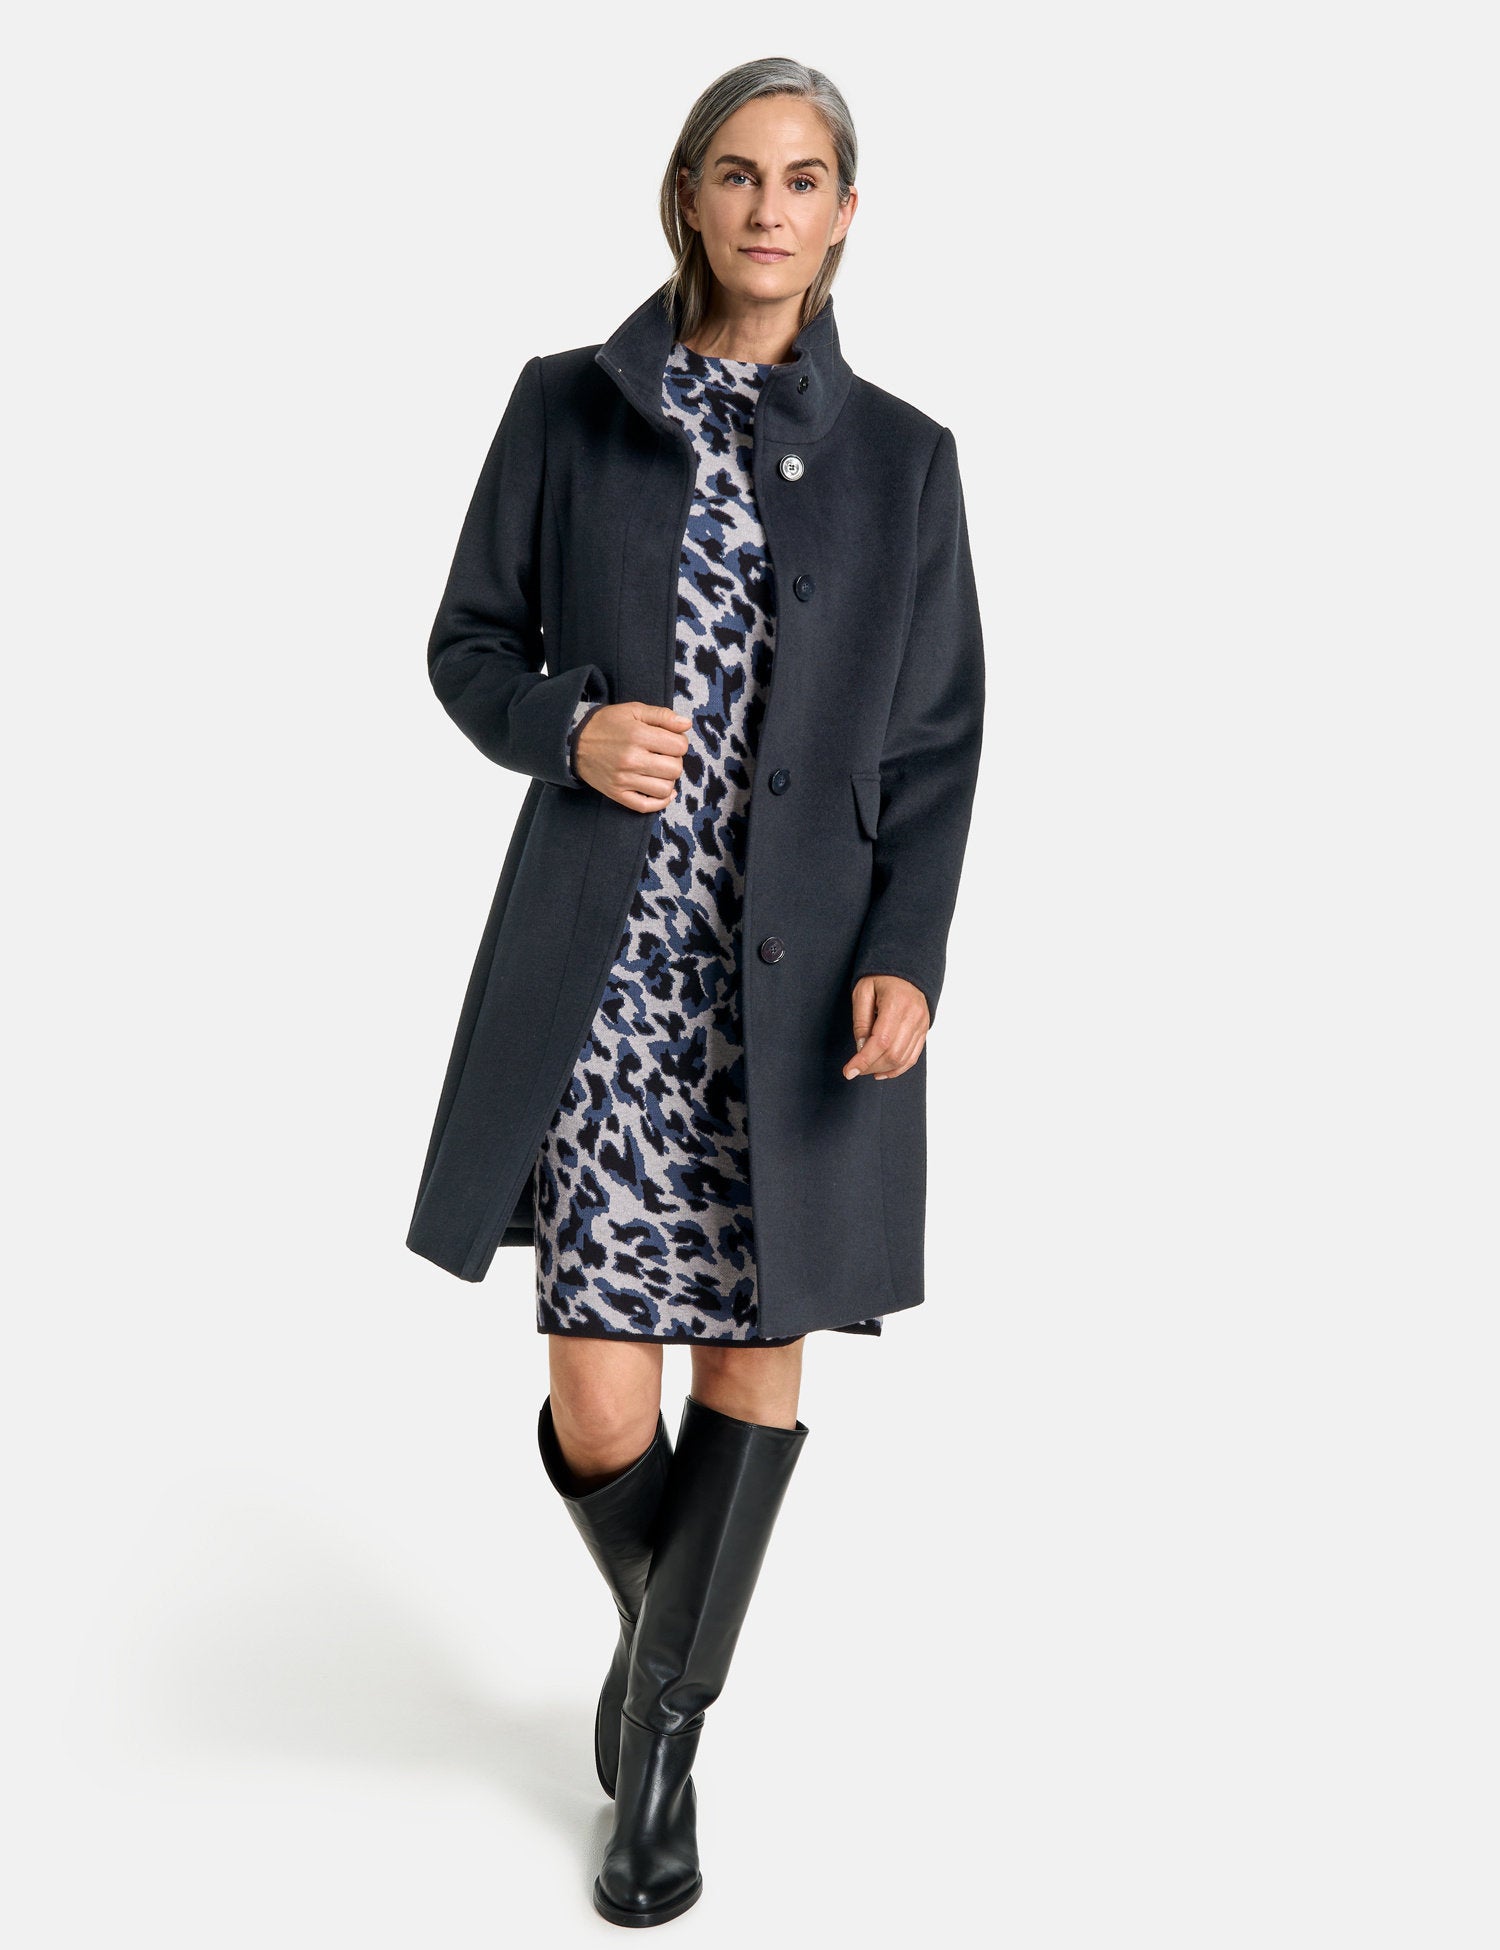 Short Wool Coat With A Stand Up Collar_250235-31131_80880_07